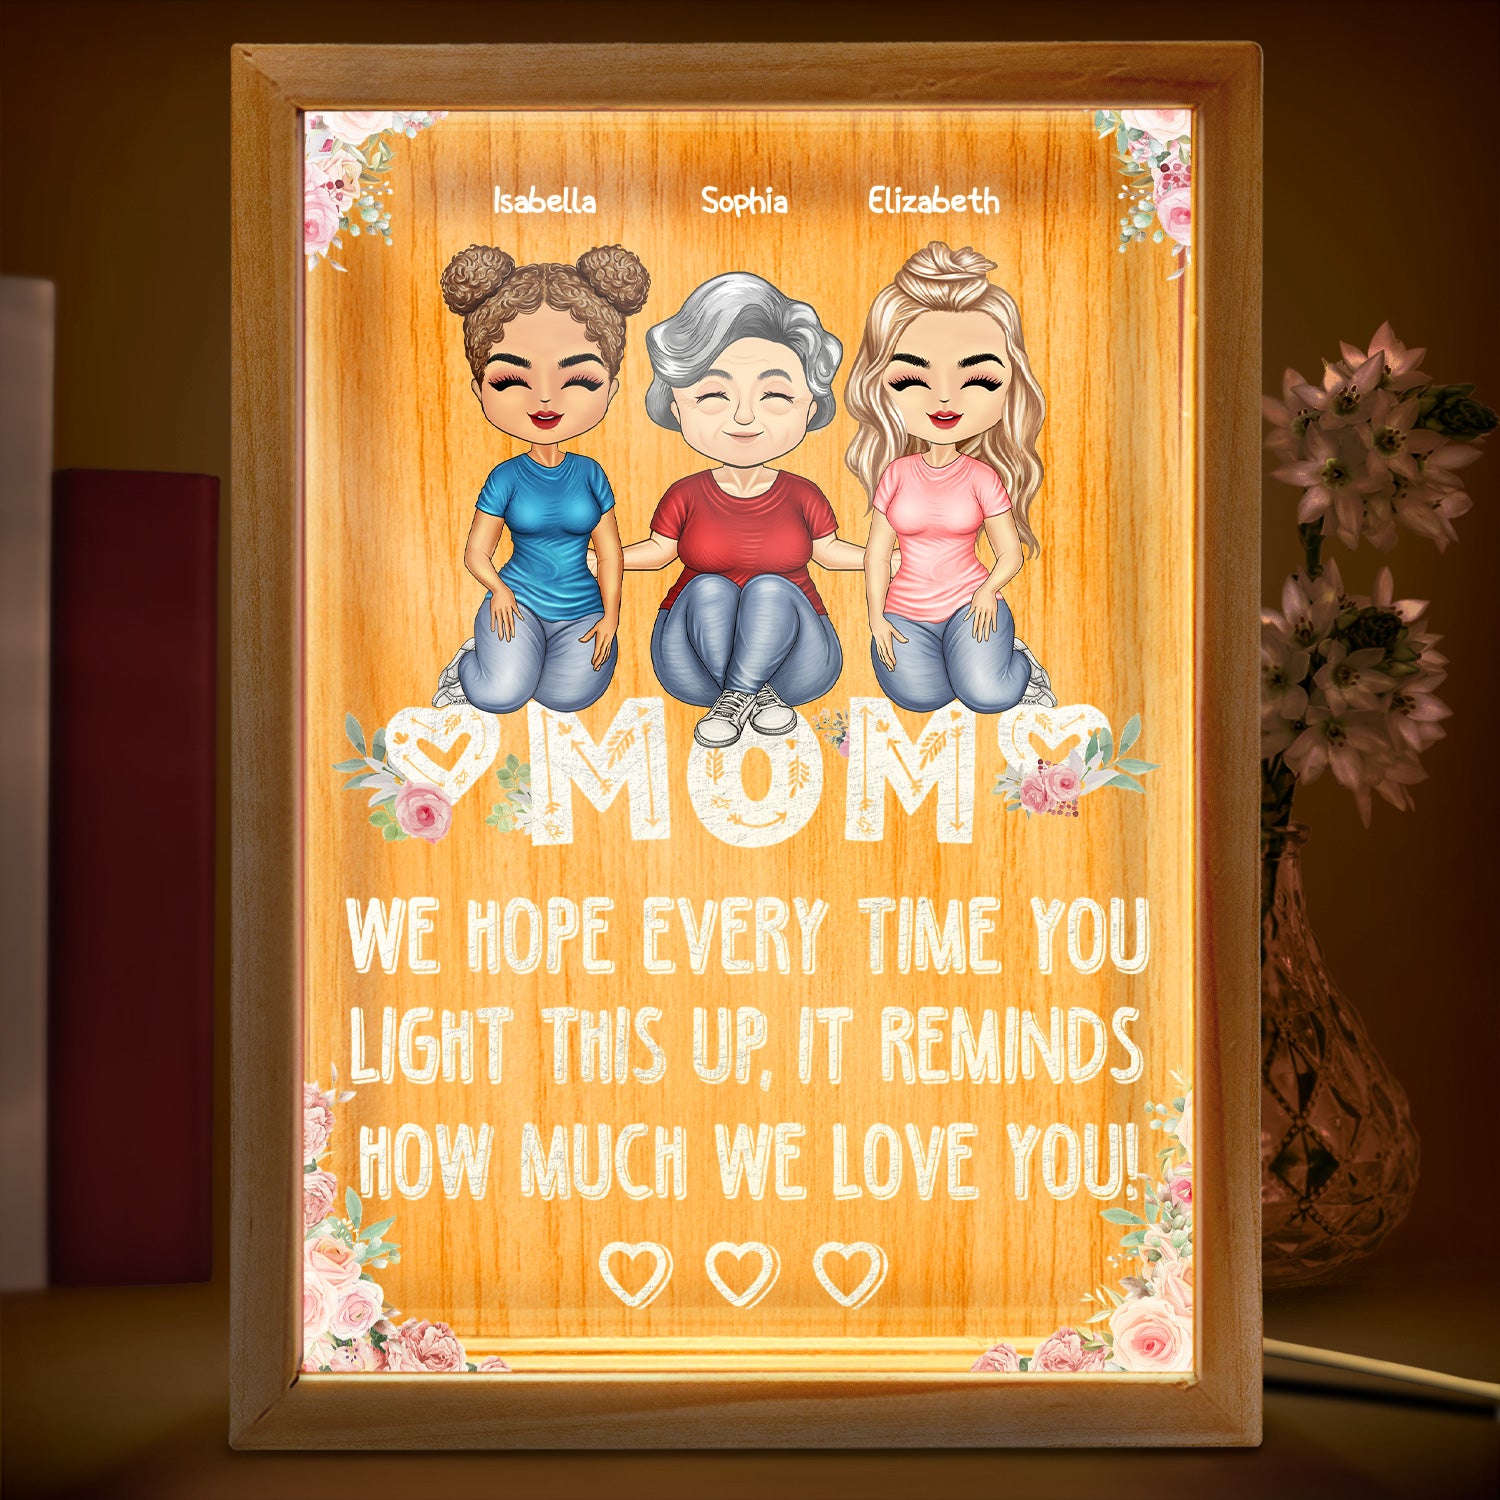 We Hope Every Time You Light This Up - Birthday, Loving Gift For Mom, Mother, Grandma, Grandmother - Personalized Picture Frame Light Box